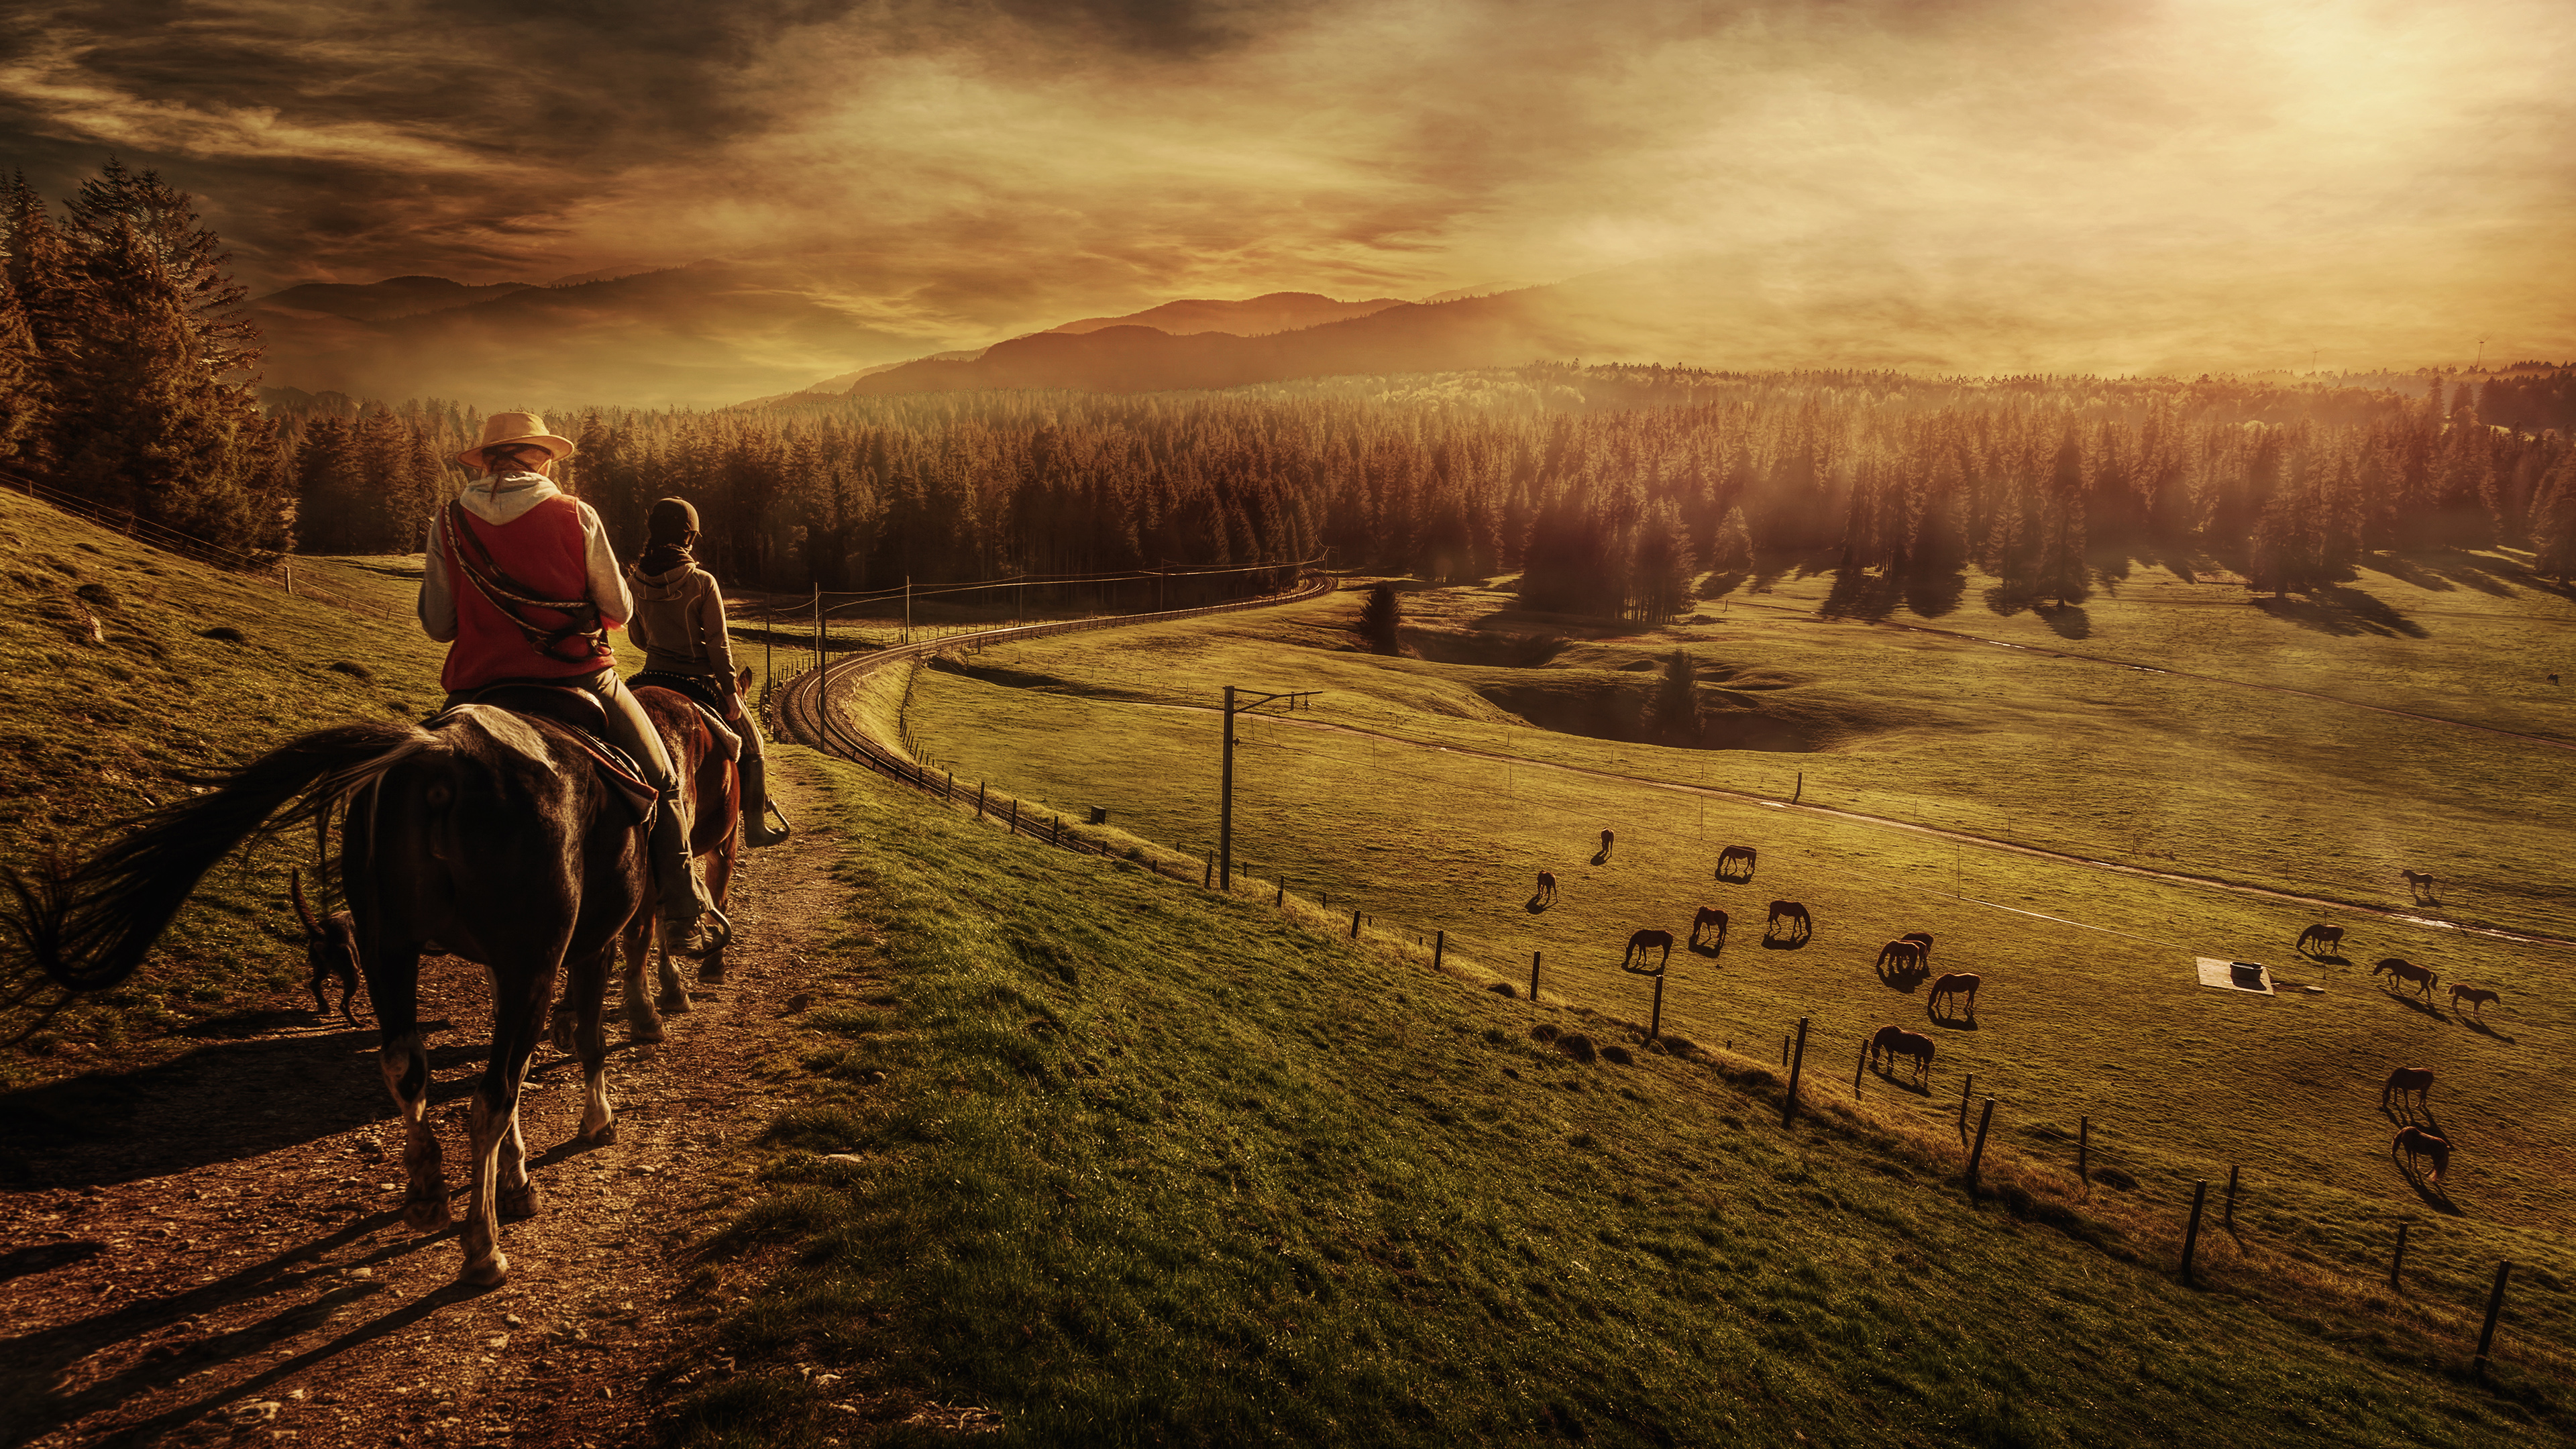 vertical wallpaper photography, landscape, people, horse, horse riding, sunset